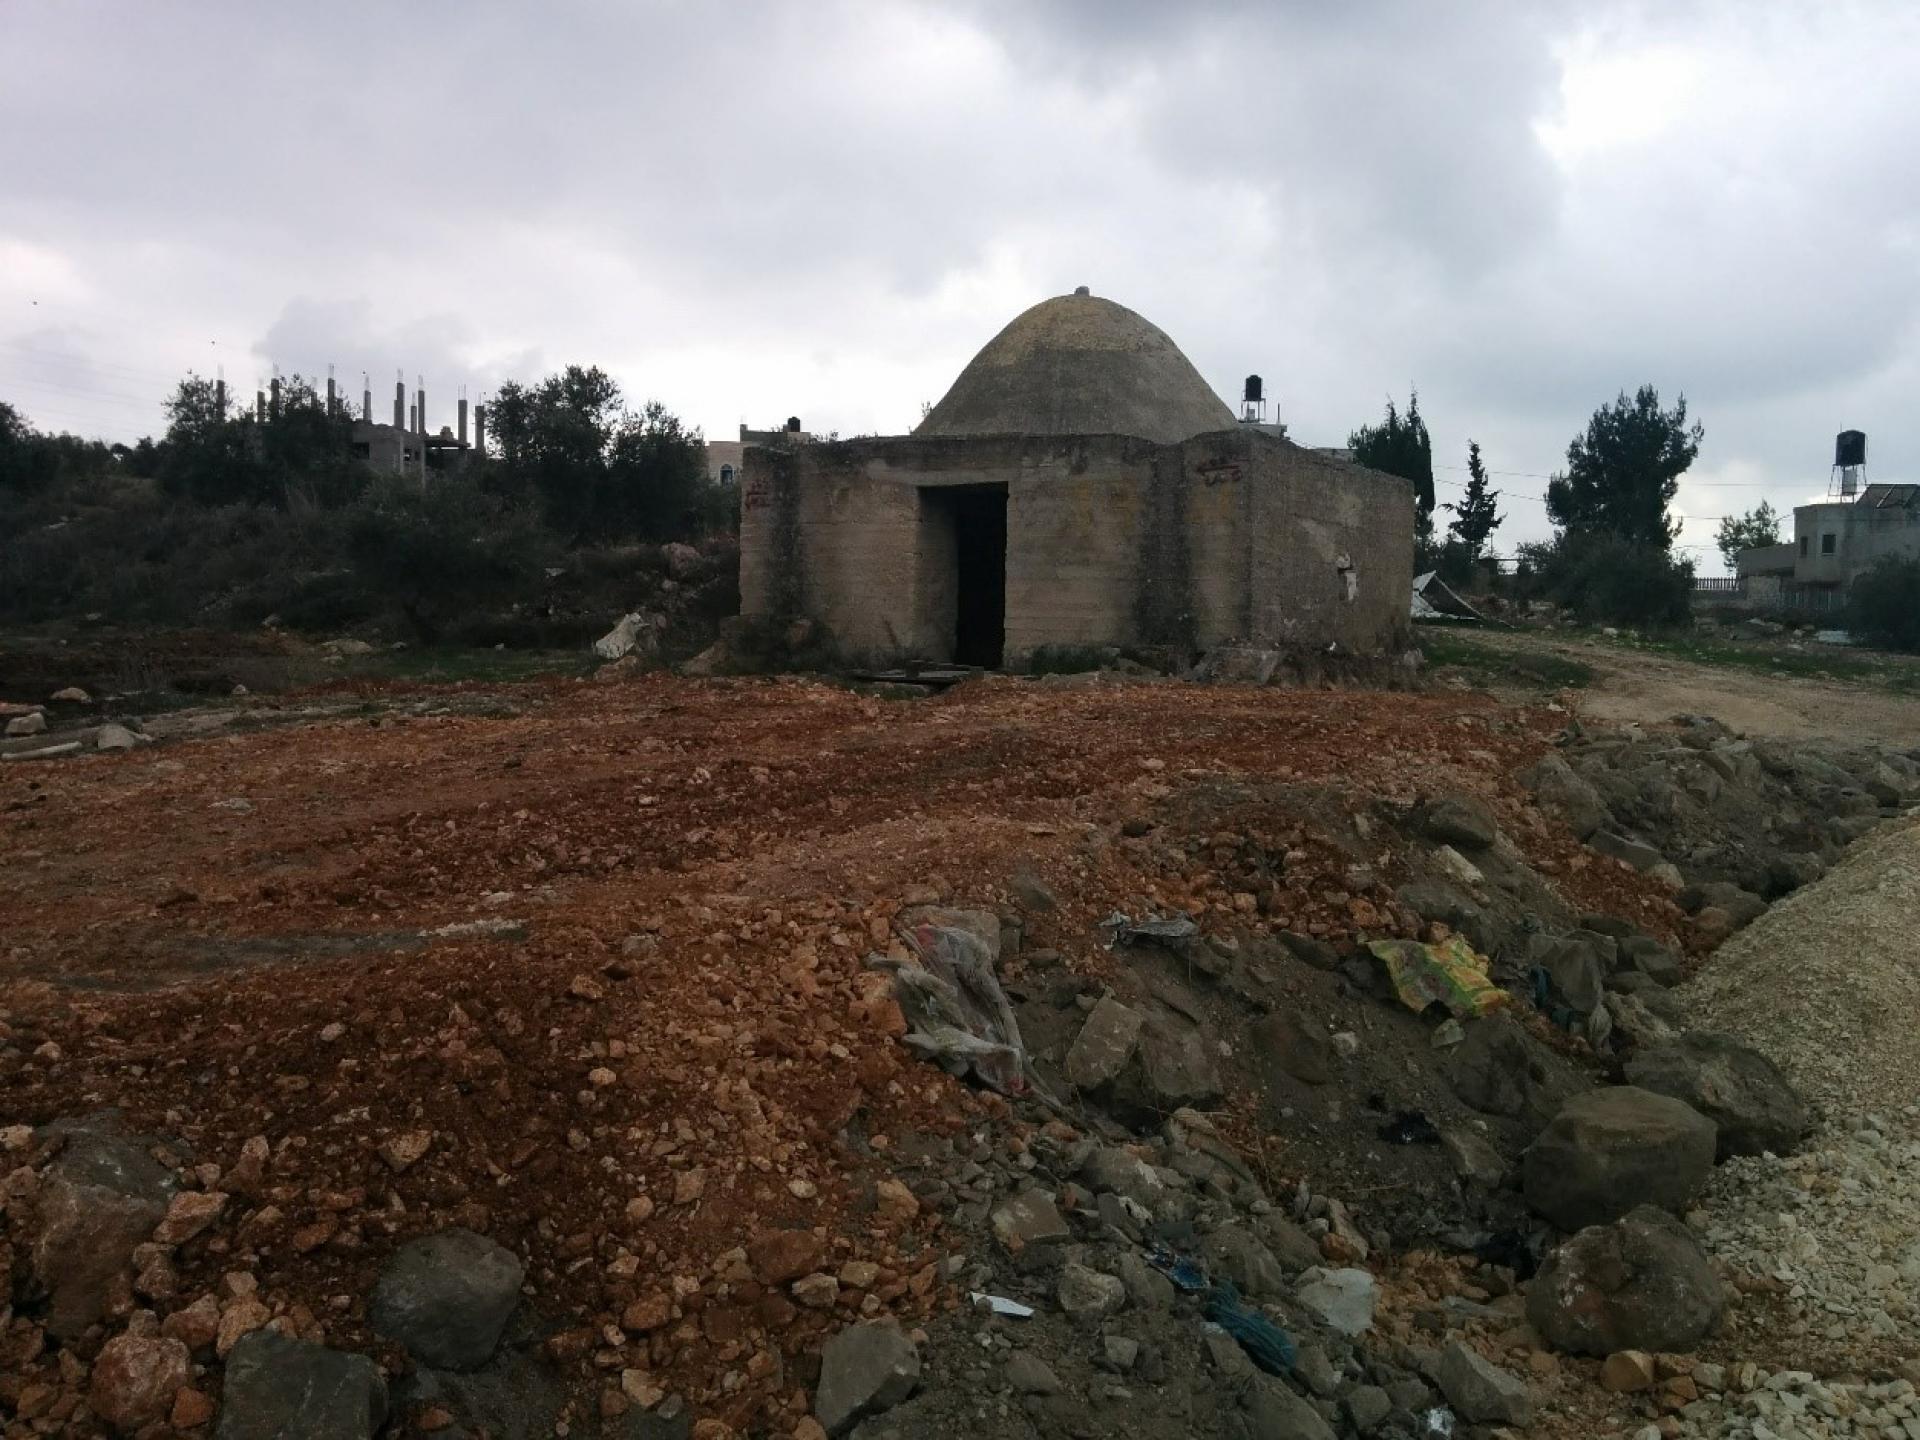 Maqam Abu Jud in northern Fur’ata. The settler-colonists of Gilad Ranch claim its cultural and historical possession